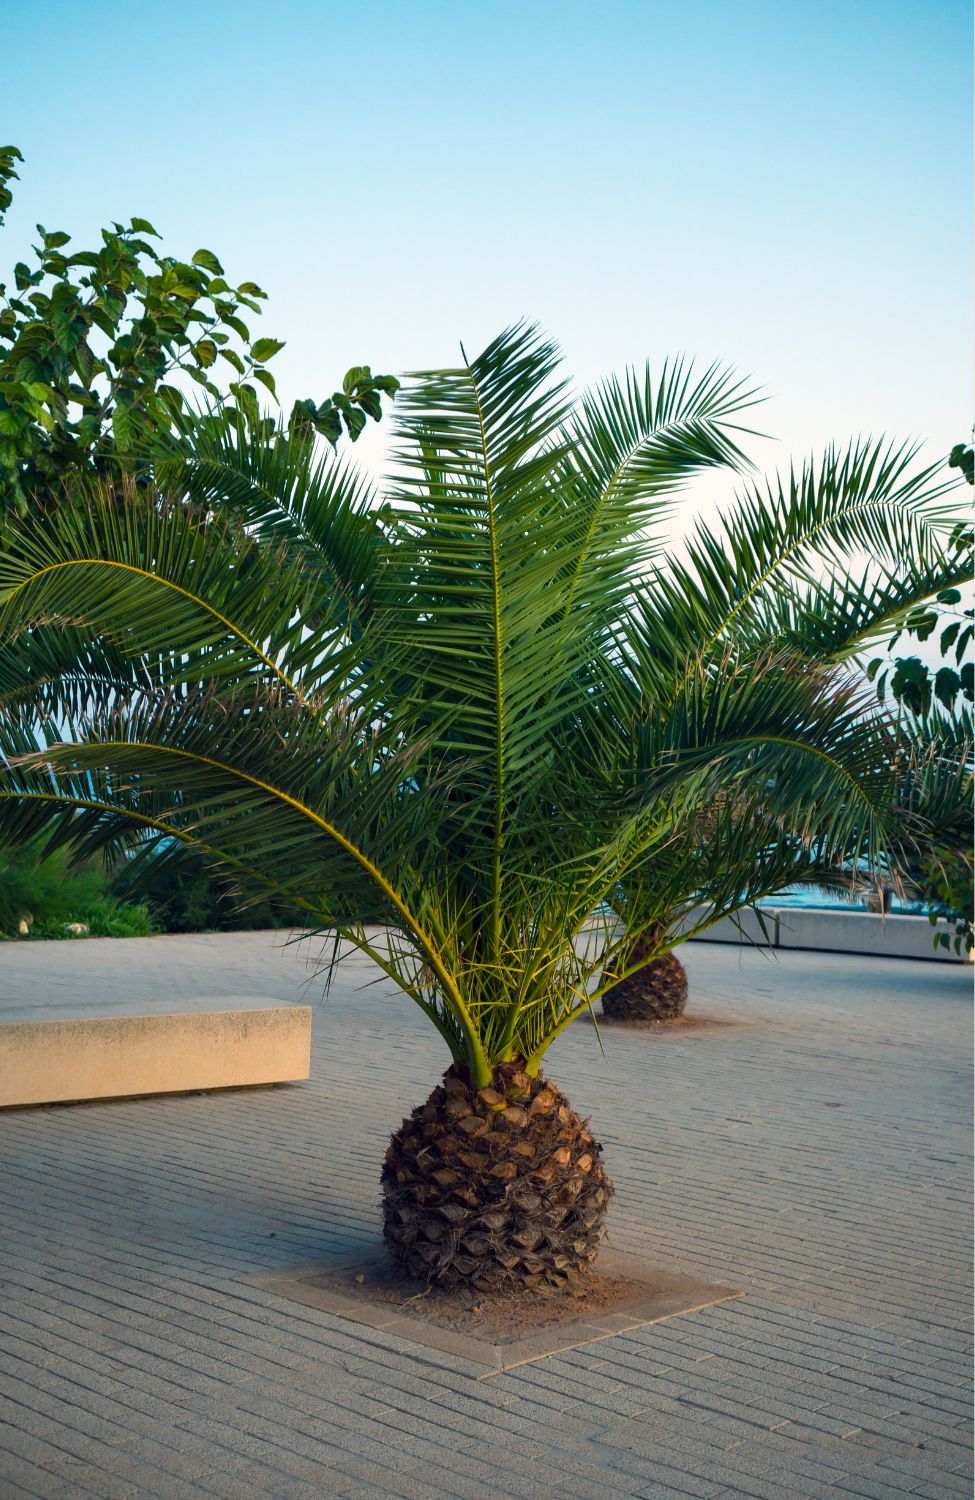 Buy Phoenix Canariensis Seeds - Grow Your Own Palm Trees at Home!